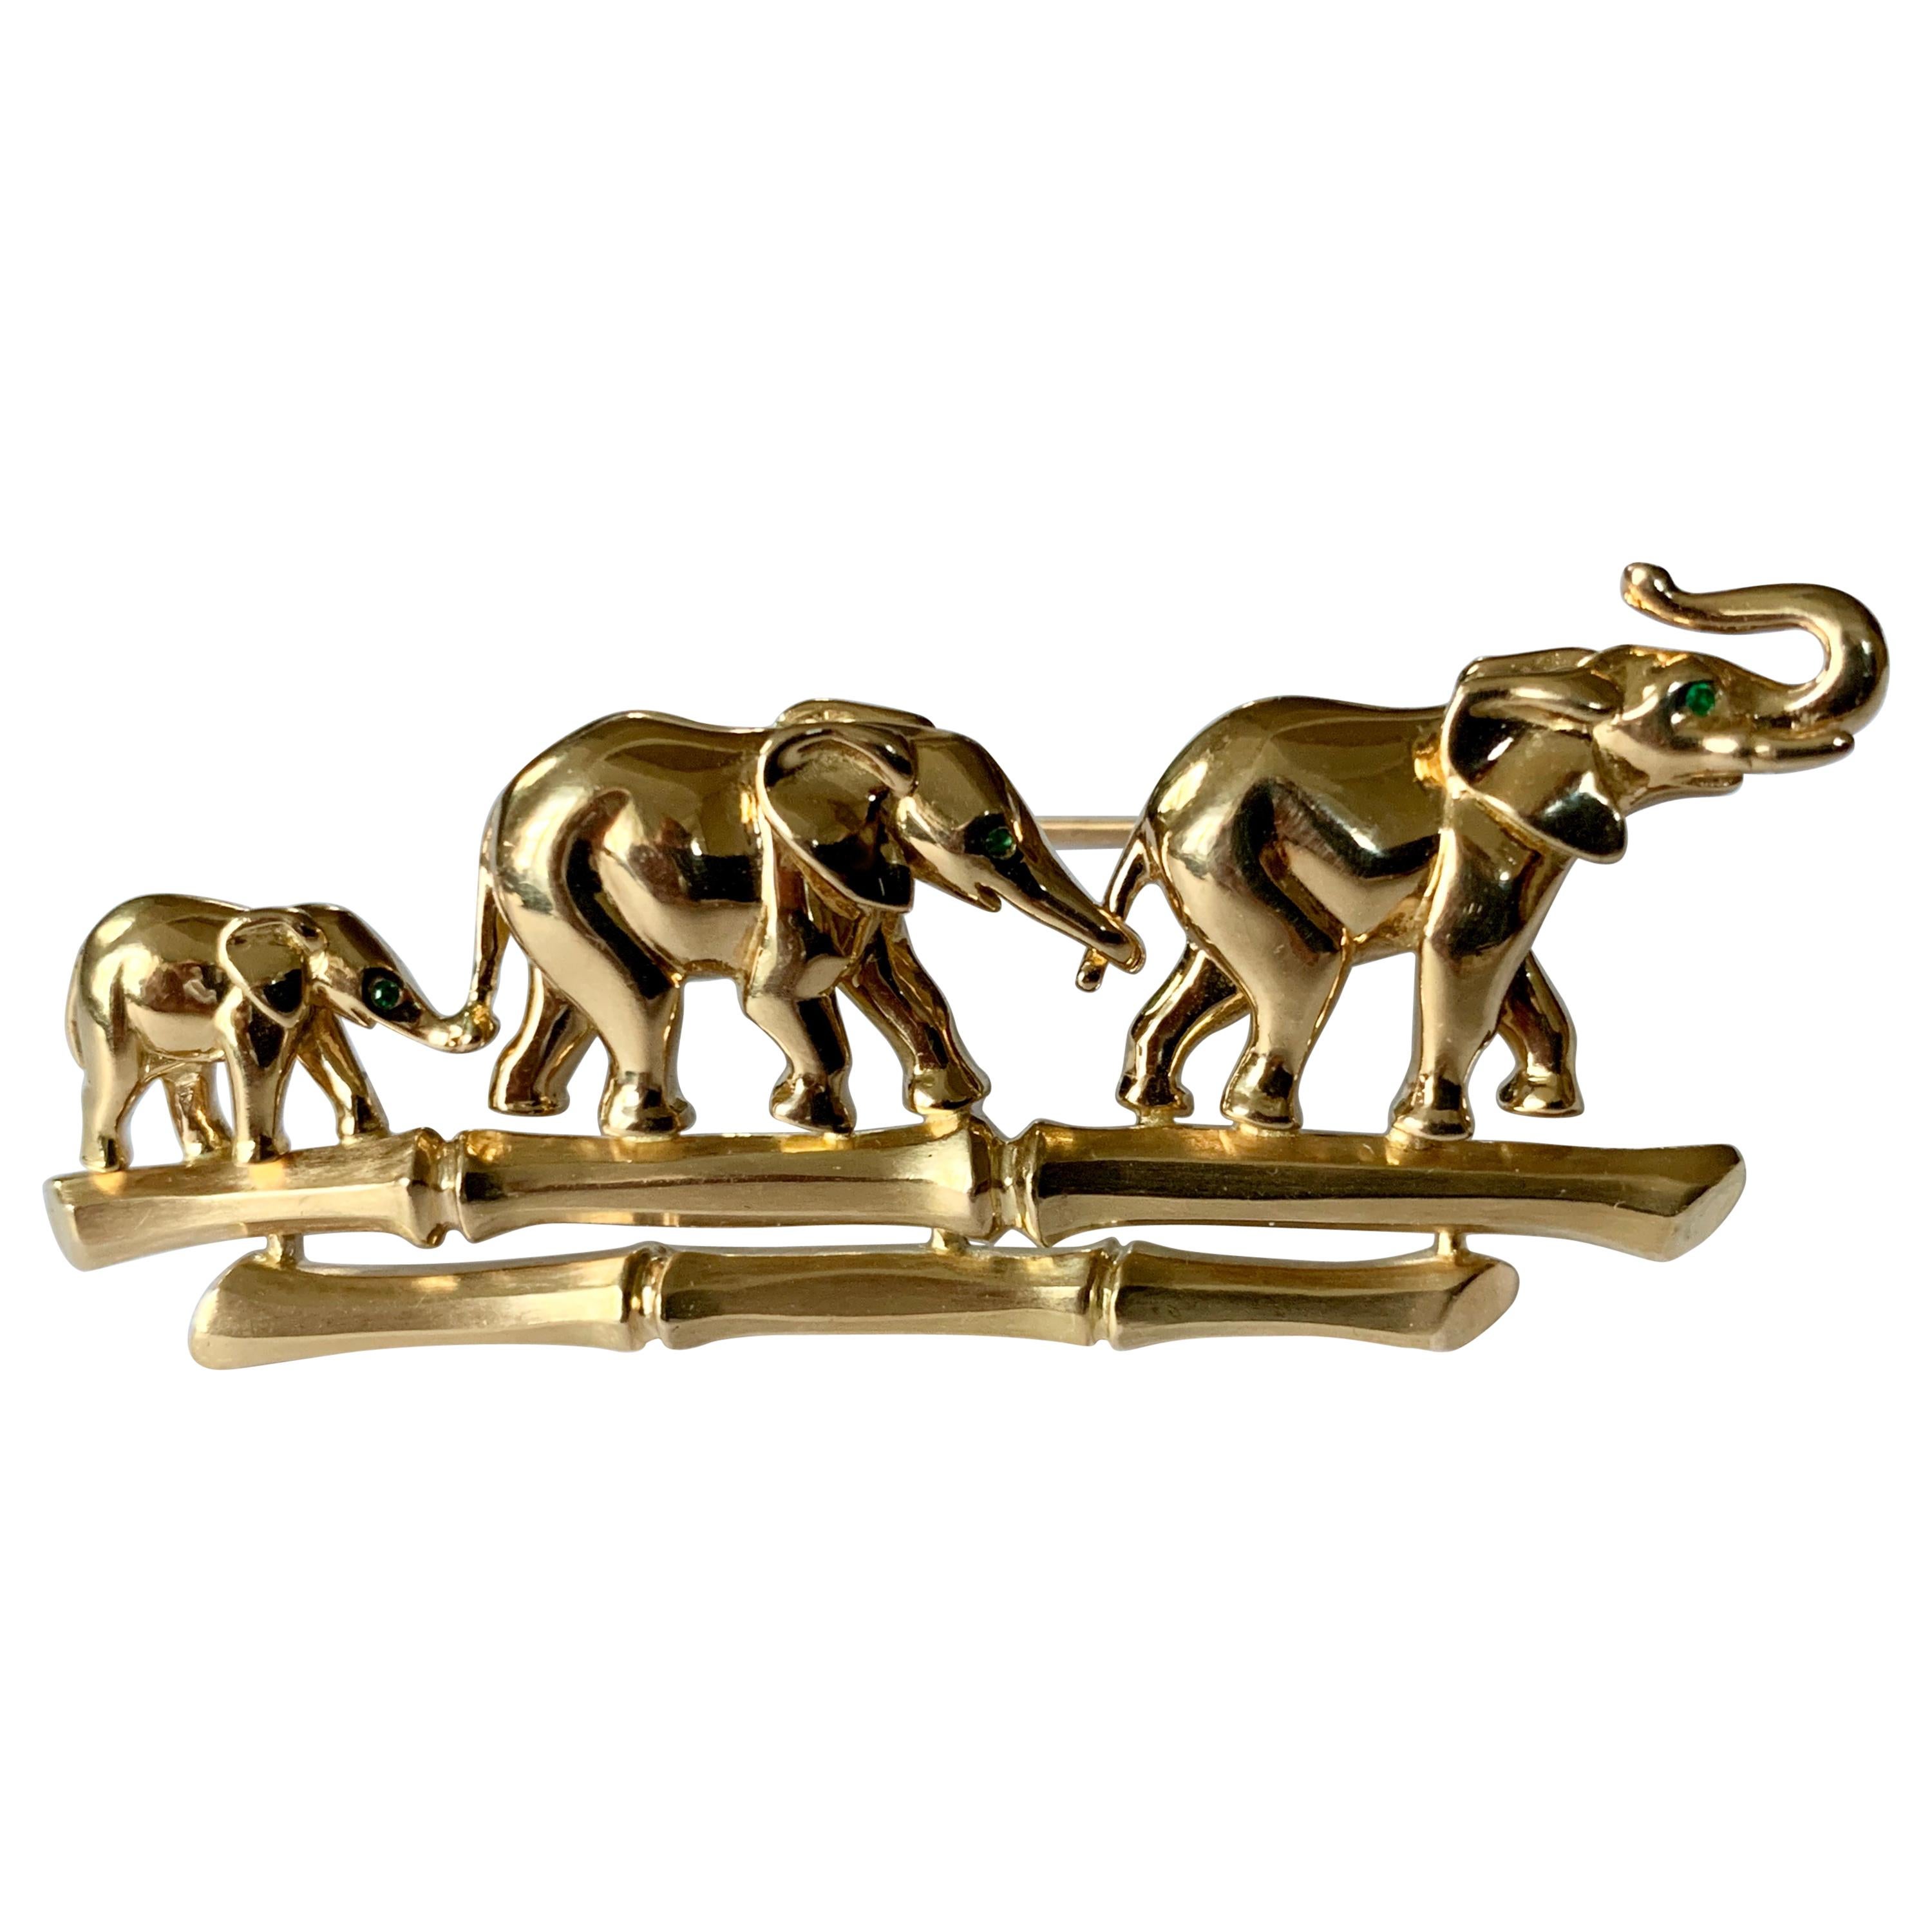 Iconic 18 Karat Yellow Gold Elephant Brooch, by Cartier